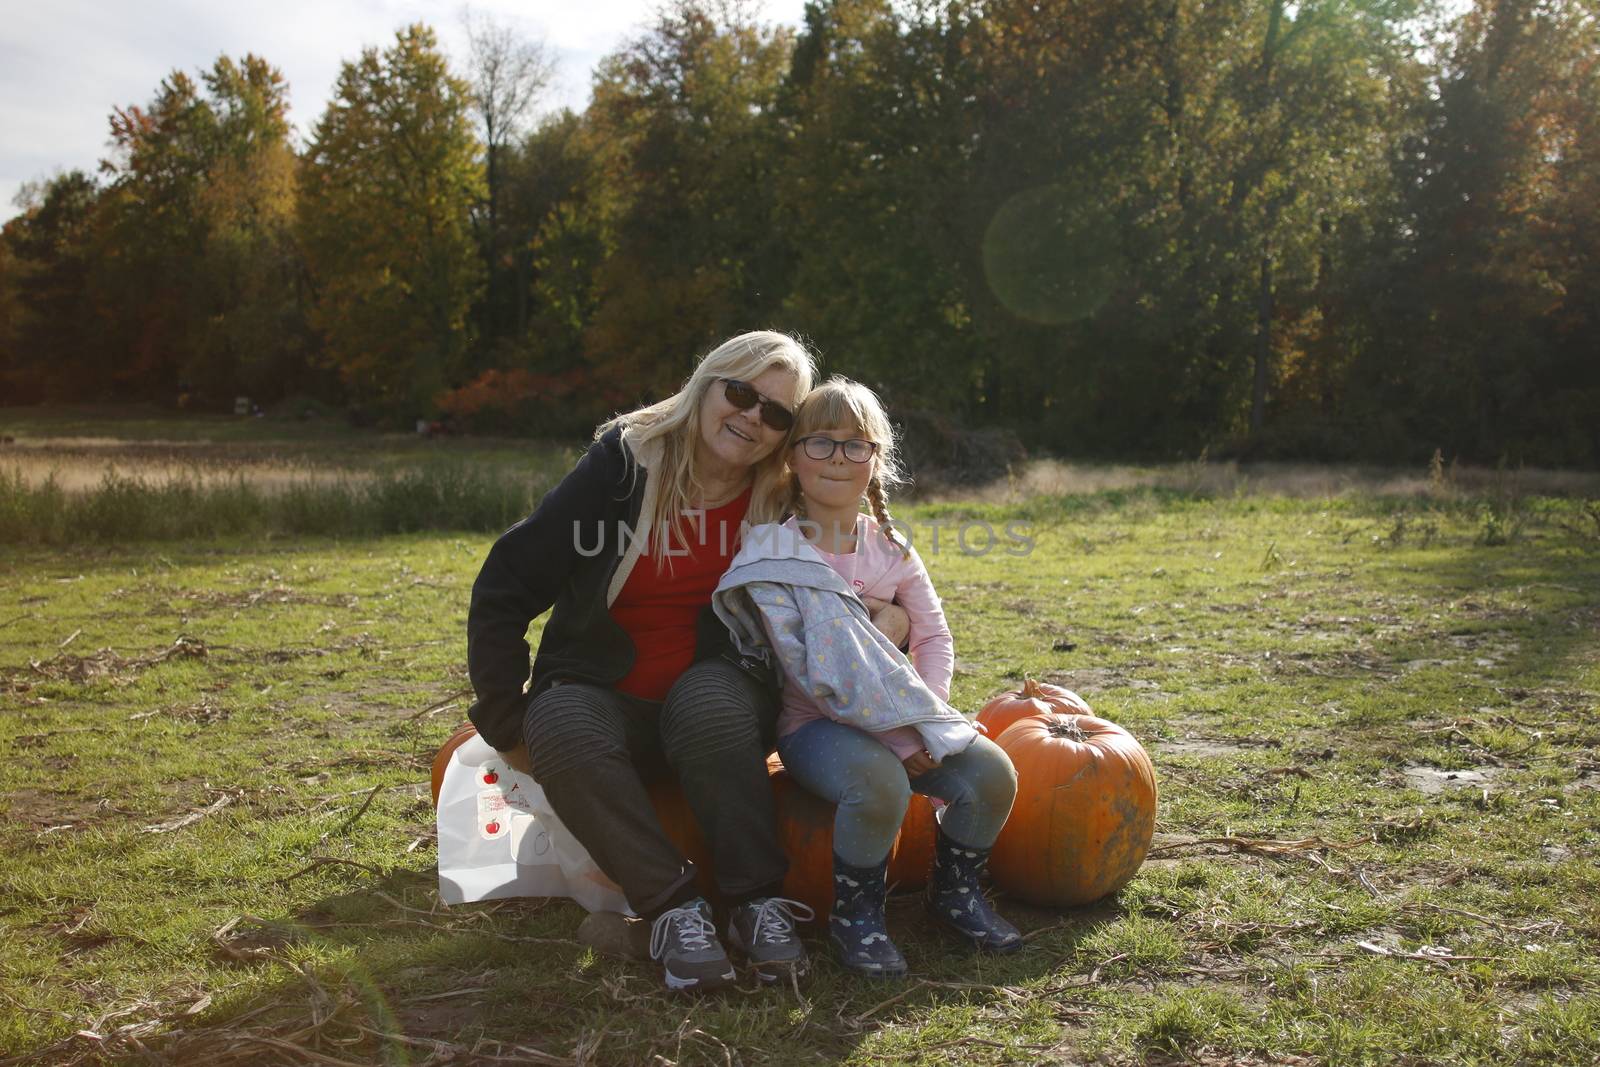 Grandma and granddaughter at a pumpkin patch enjoying the fall activity. Theme of multi-generational family activities..